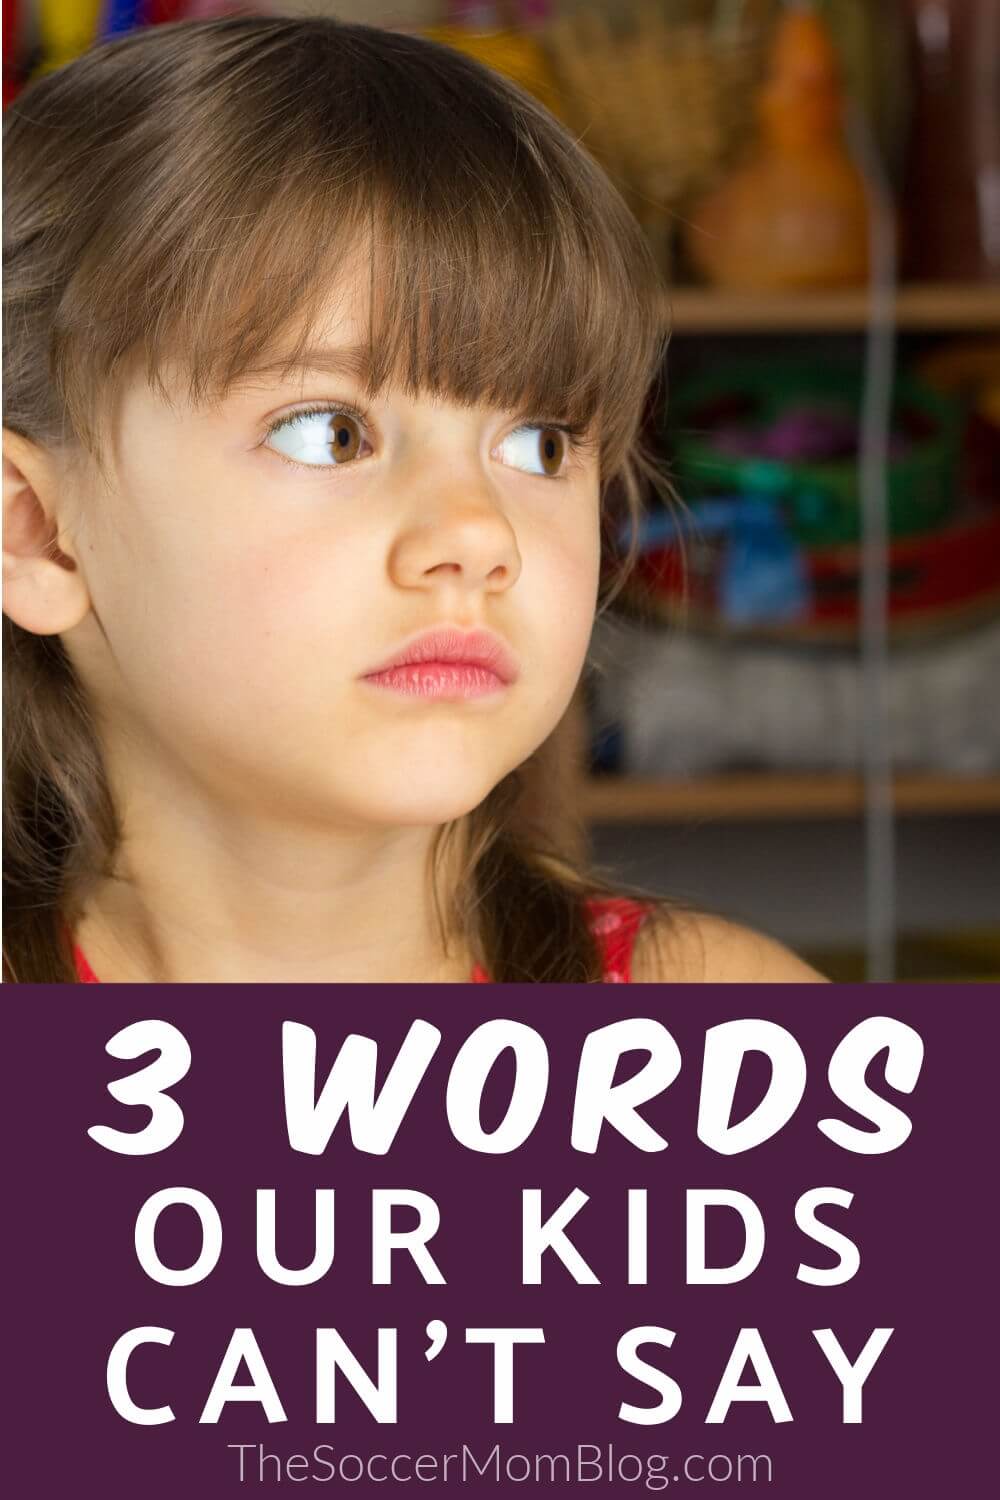 little girl pouting; "3 Words Our Kids Can't Say"